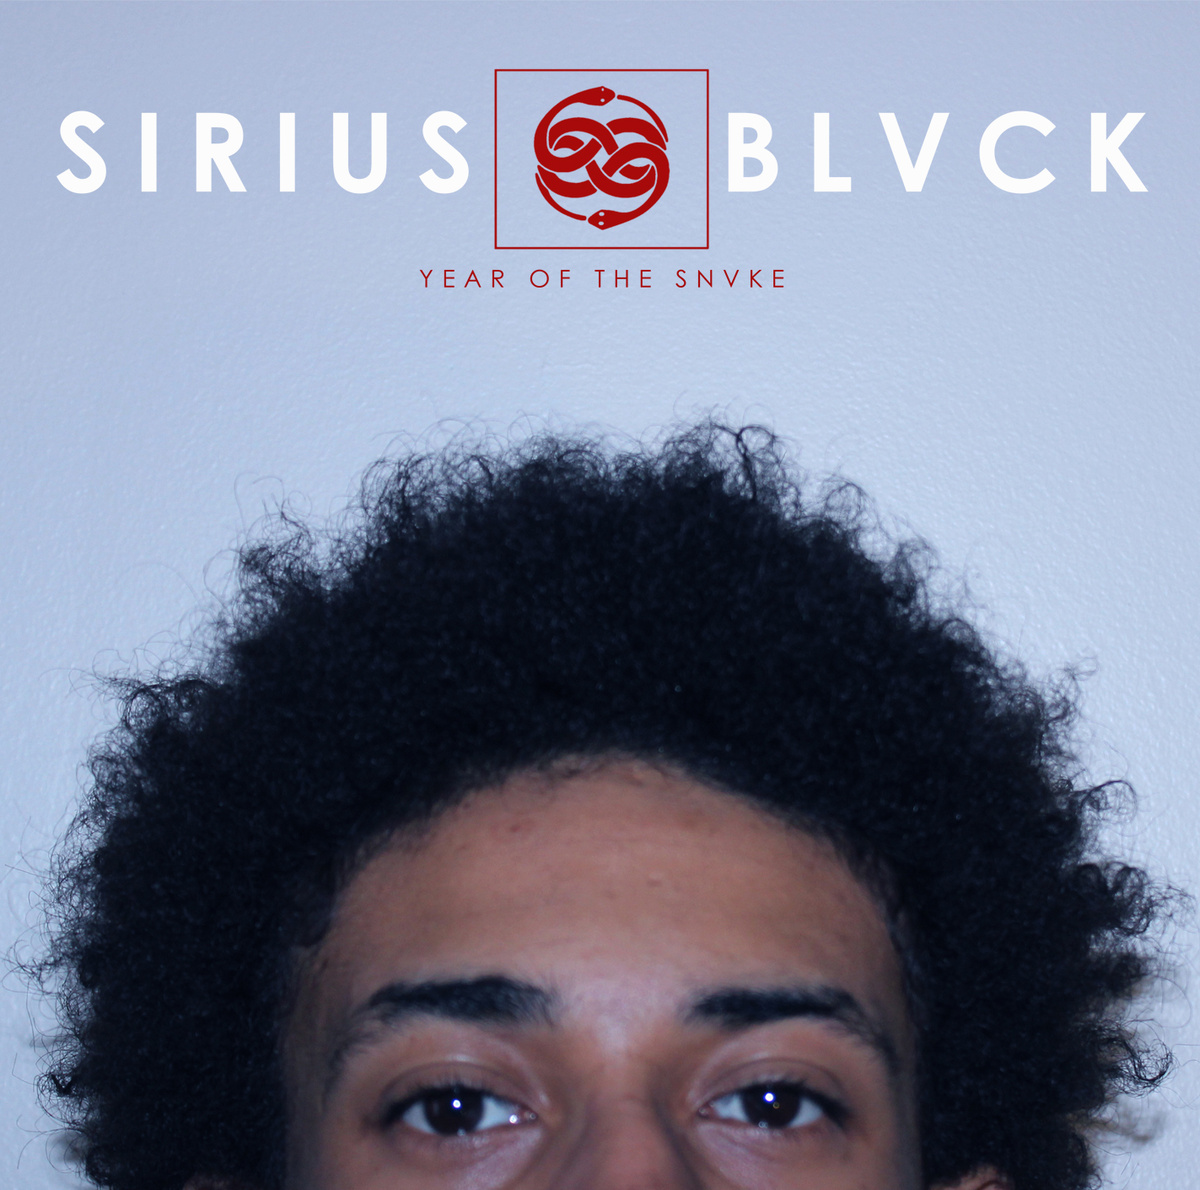 Sirius Blvck - "Year Of The Snake" (Release)